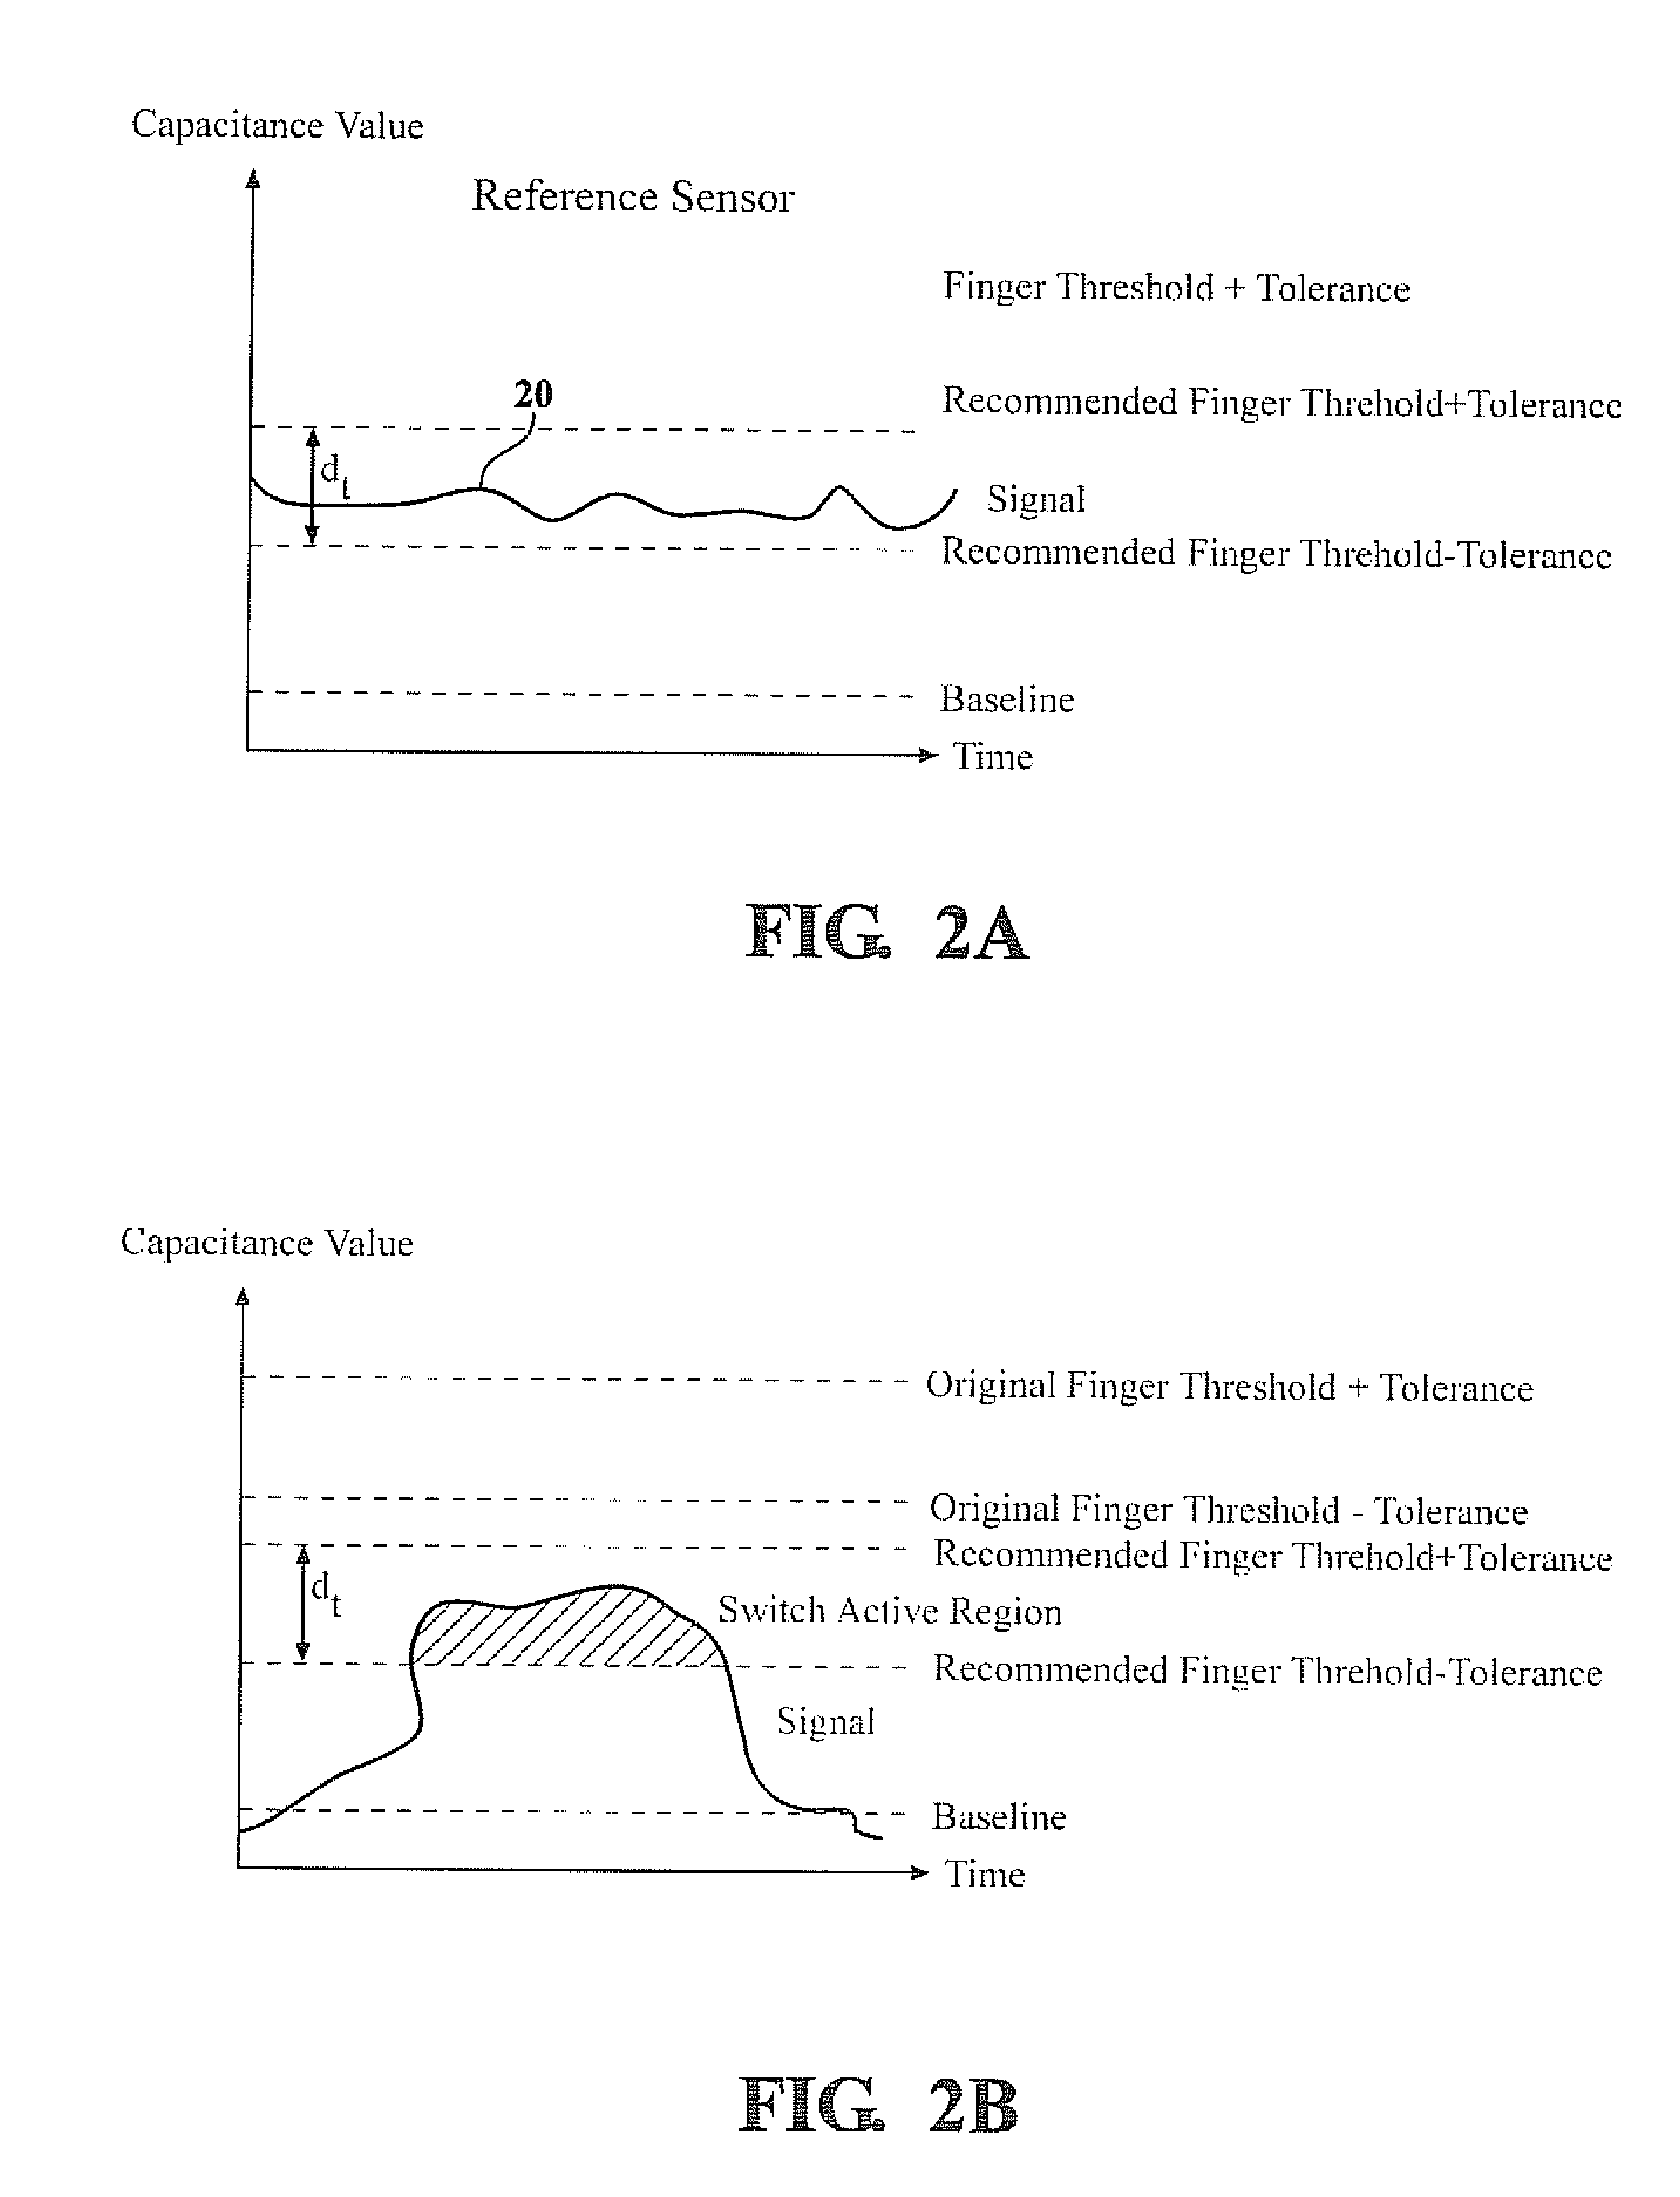 Capacitive switch reference method